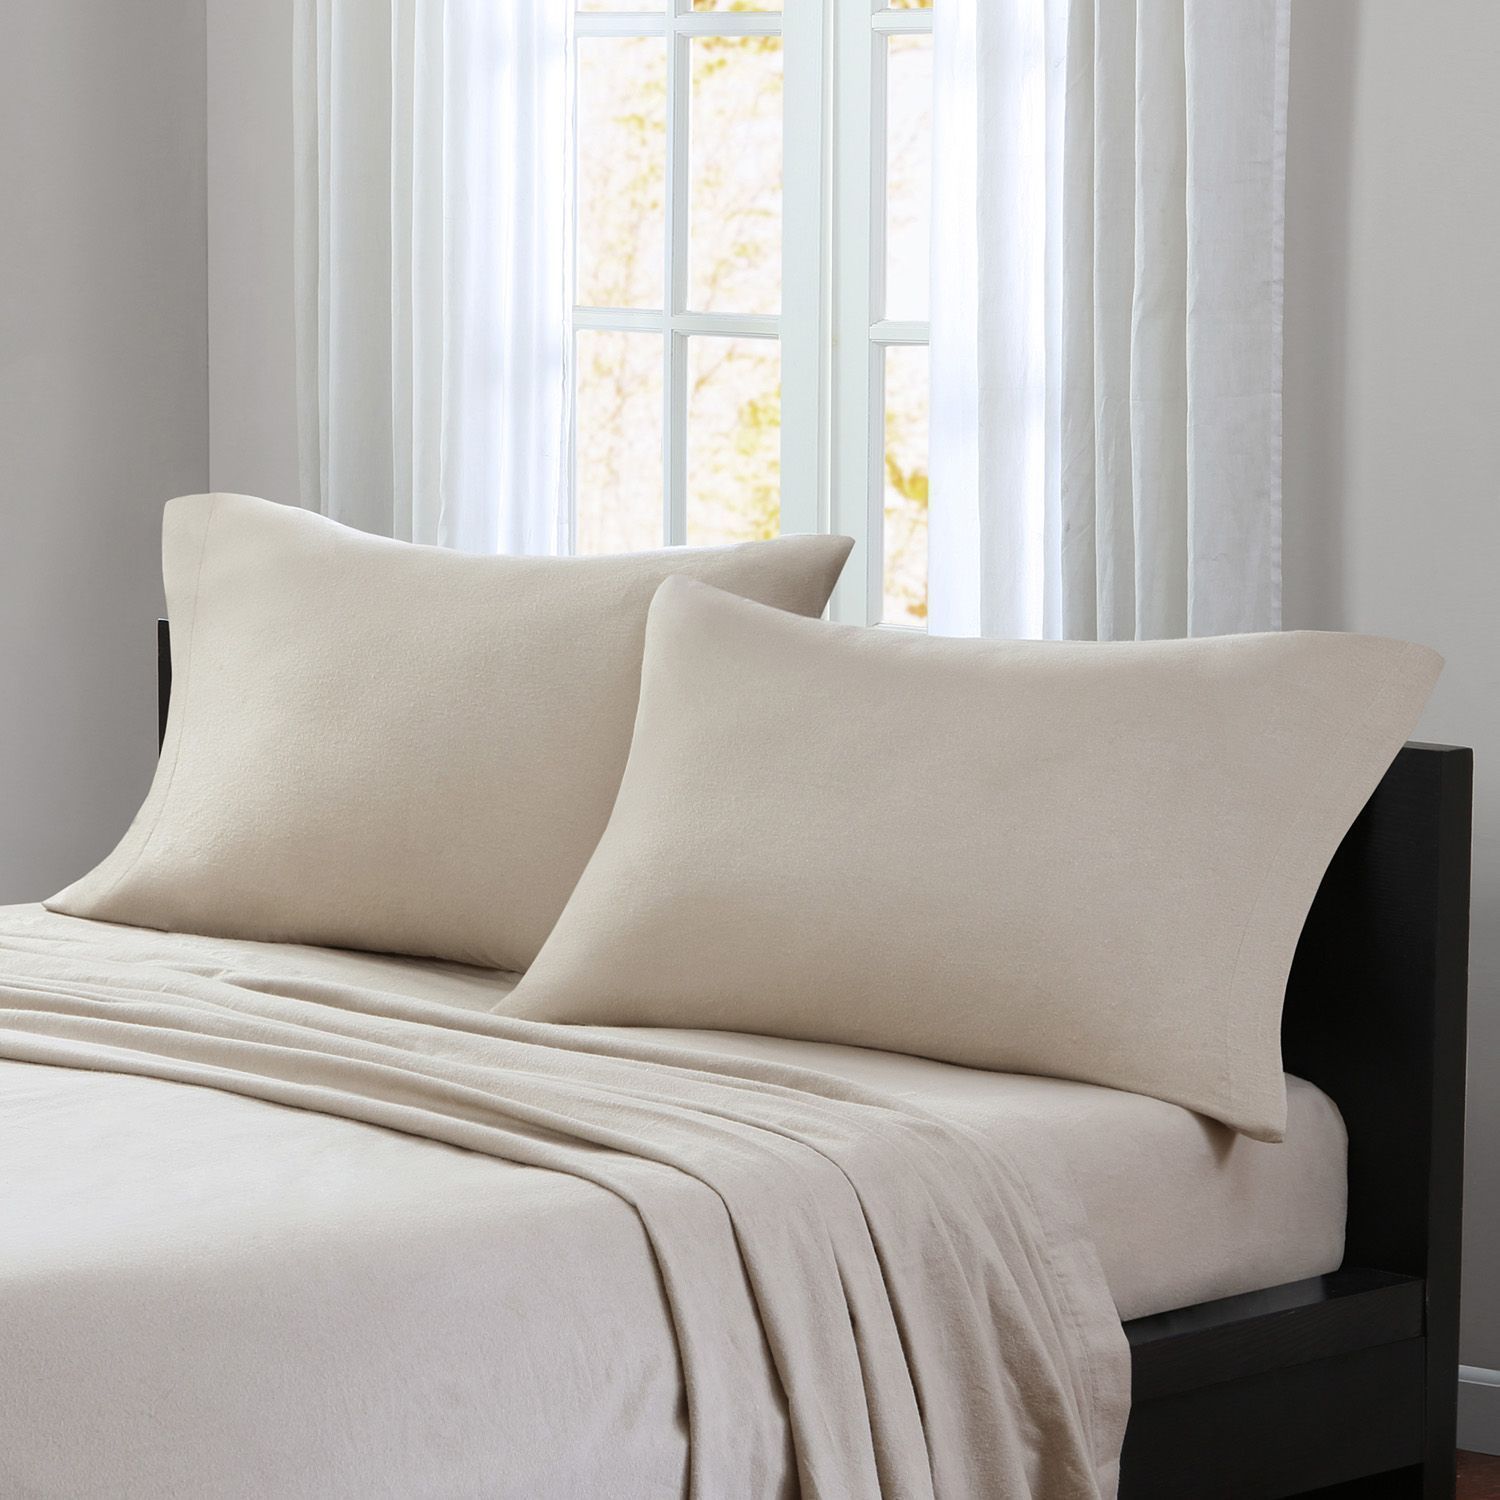 NEW WOOLRICH Cozy Warmth Flannel Twin/Full Sheet Set 100% Cotton Double brushed - $39.99 - $49.99